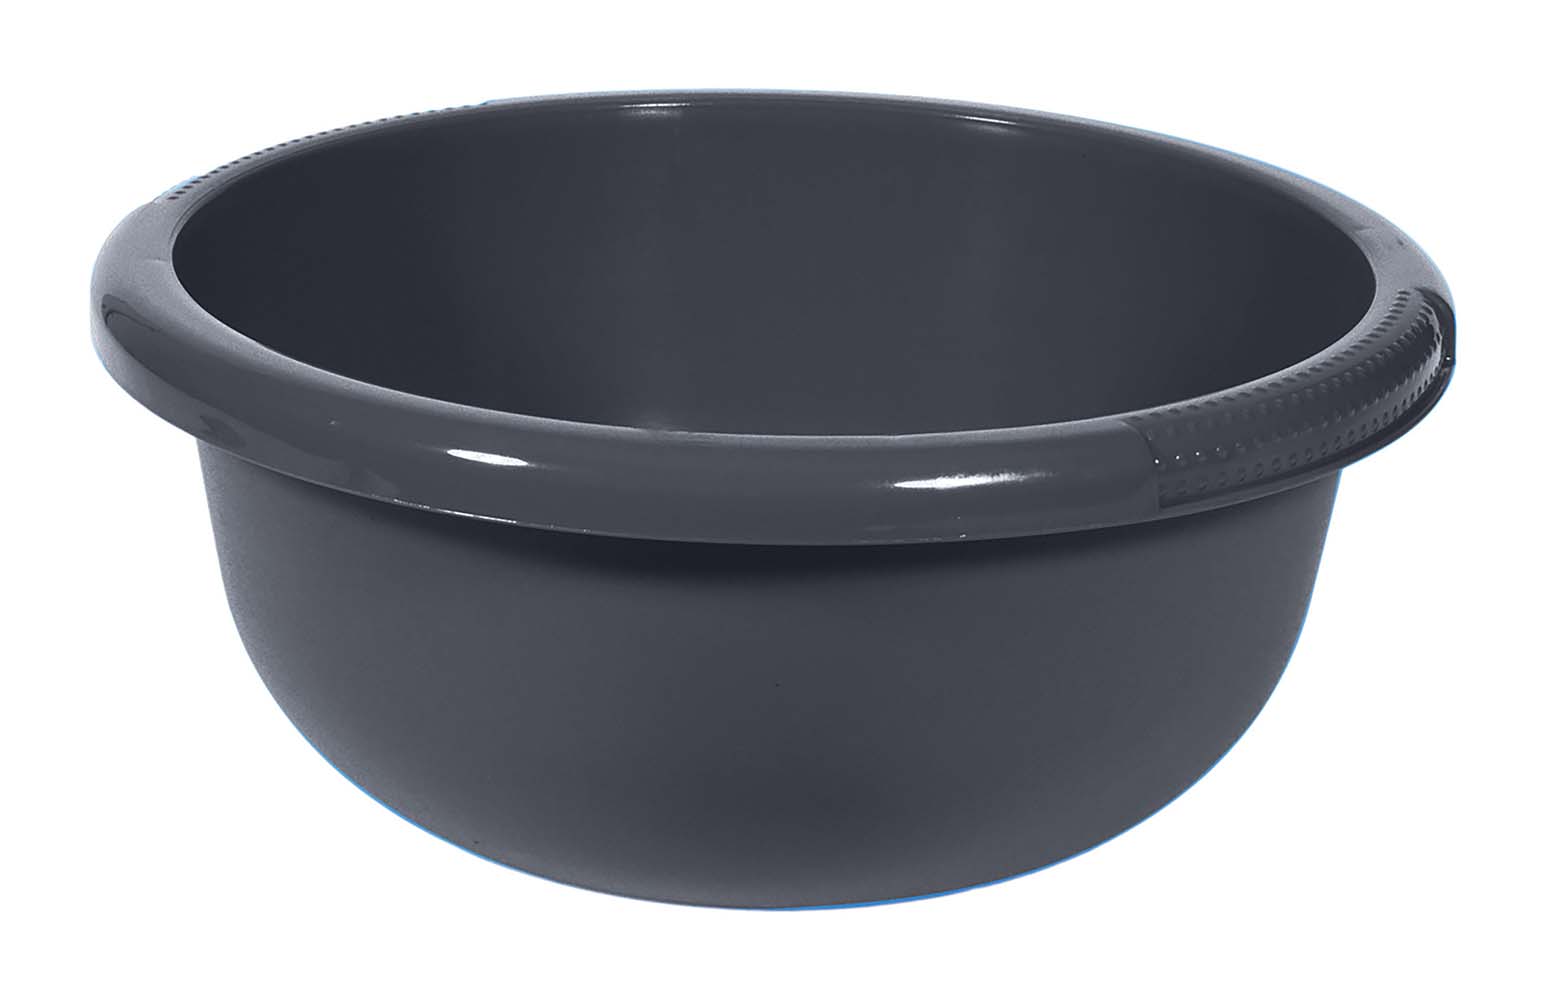 6302131 A solid round washing up bowl. Easy to carry because of the wide edge. This bowl has a content of 10 litres.